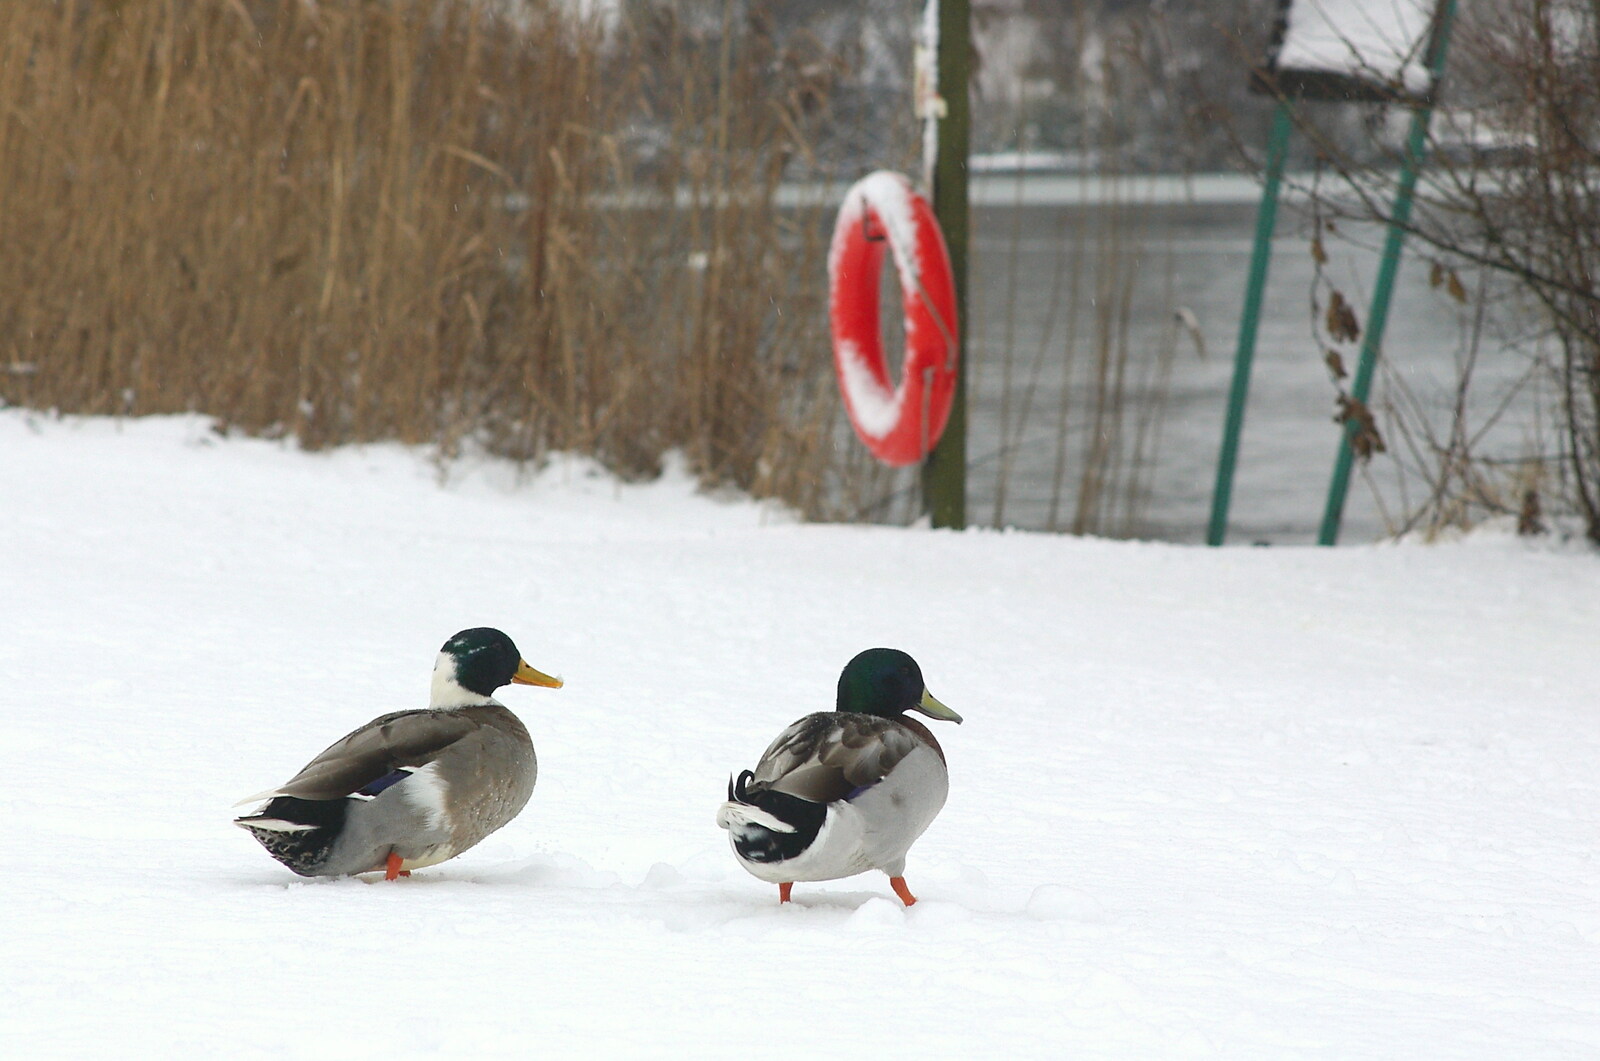 A couple of ducks waddle around from Wendy Leaves "The Lab" and a Snow Day, Cambridge and Brome - 25th February 2005